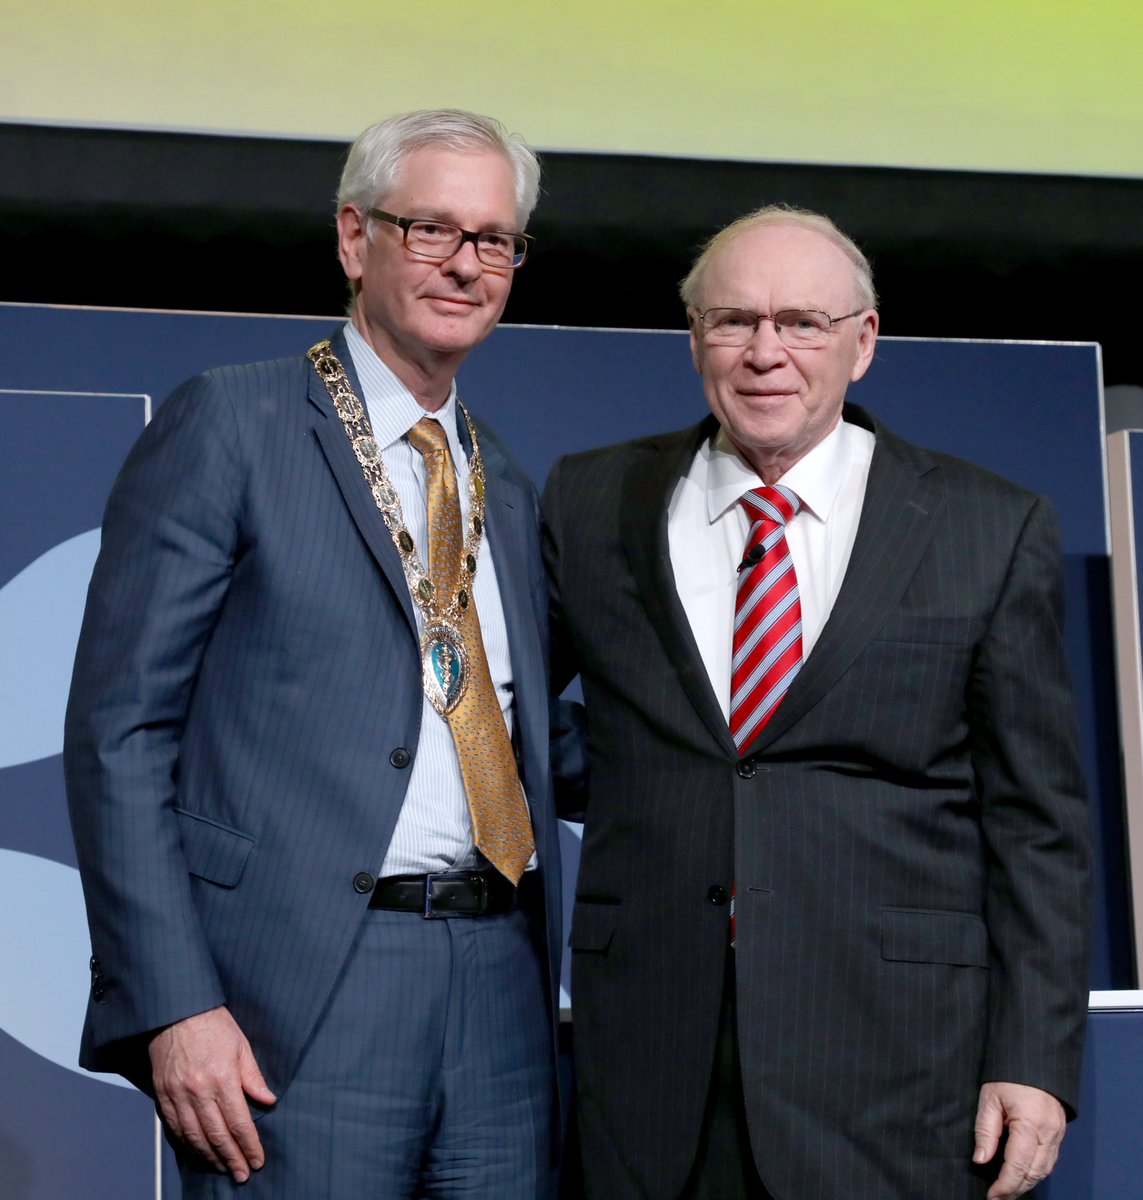 Join us in congratulating Dr. David R. Jones as 105th President of the American Association for Thoracic Surgery.